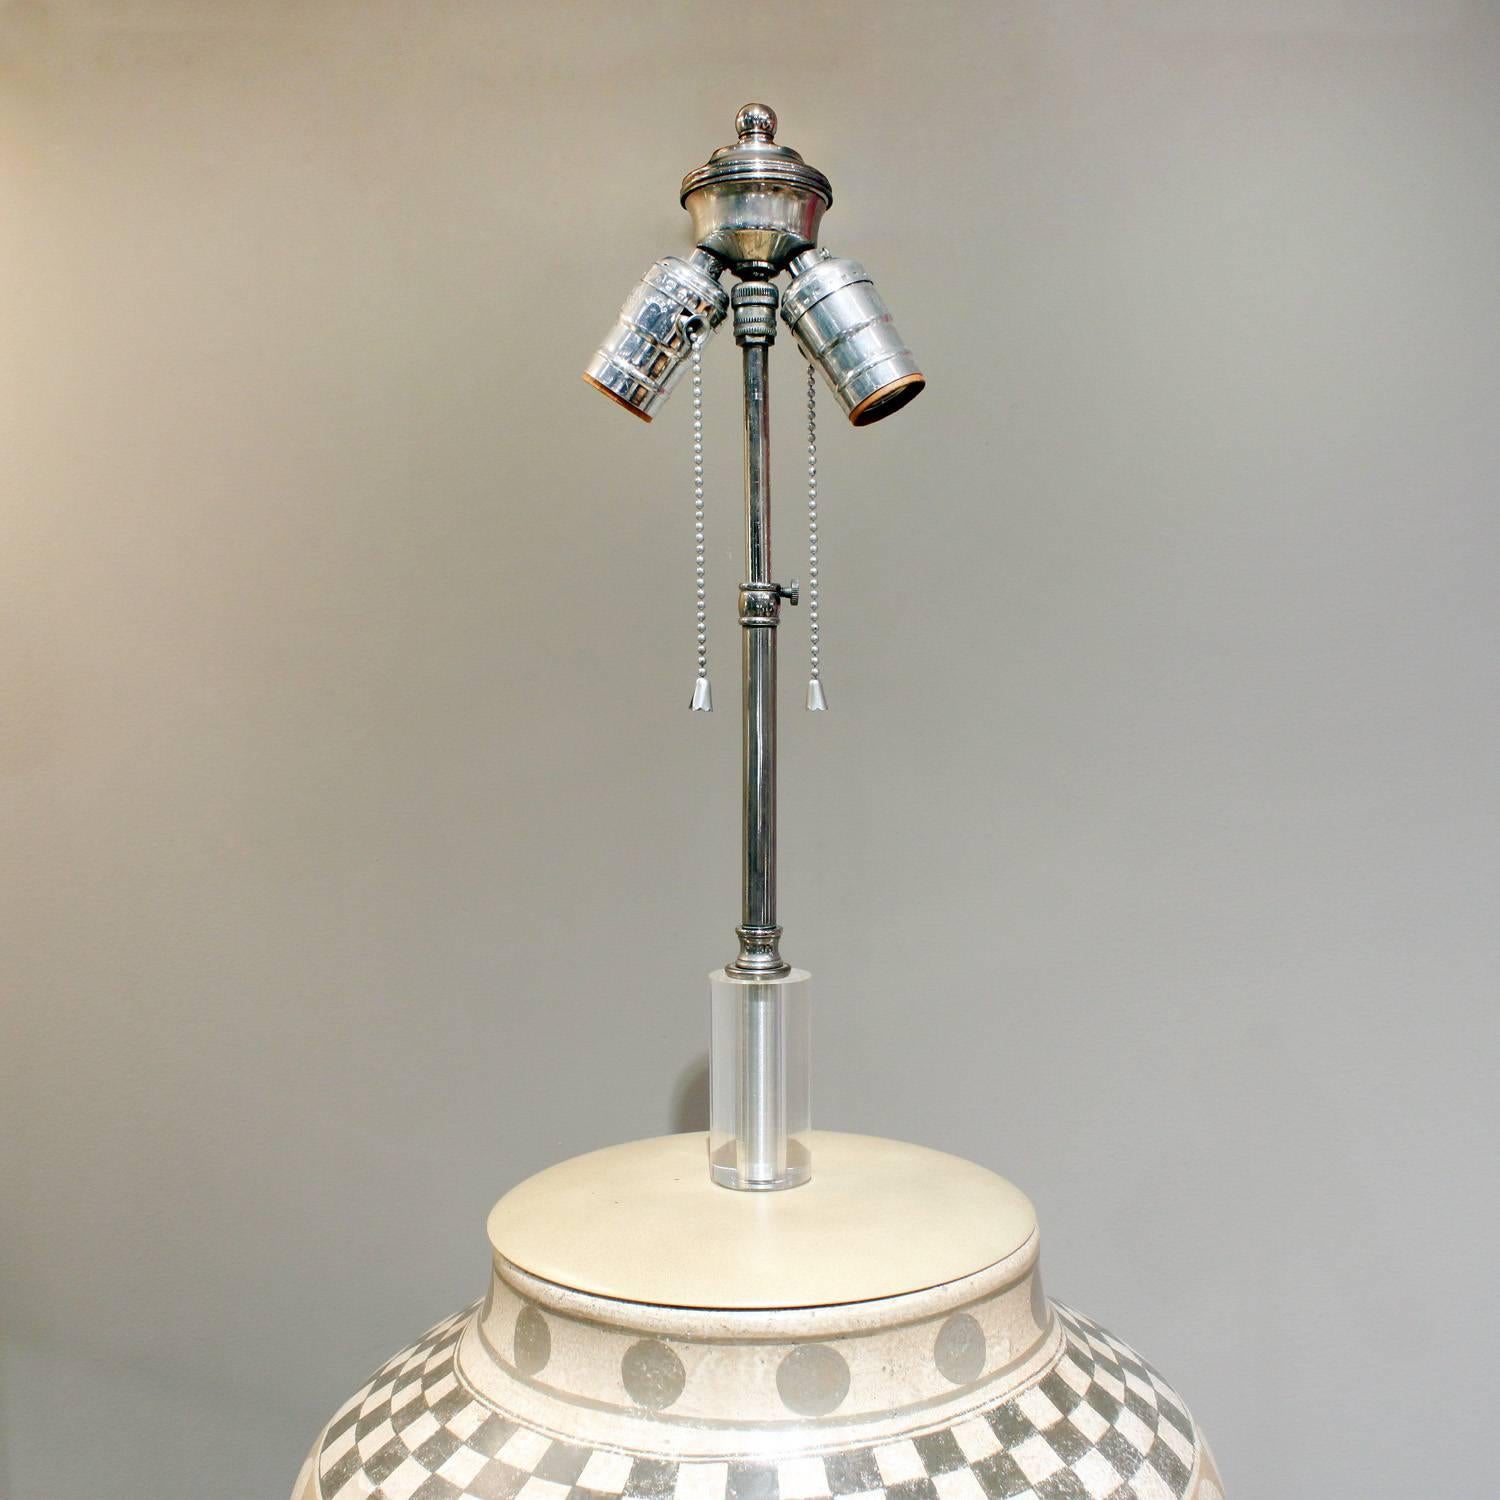 Large ceramic table lamp with hand-applied geometric decoration on a thick Lucite base by Trattoria G., Italy, 1970s (signed on base and side).